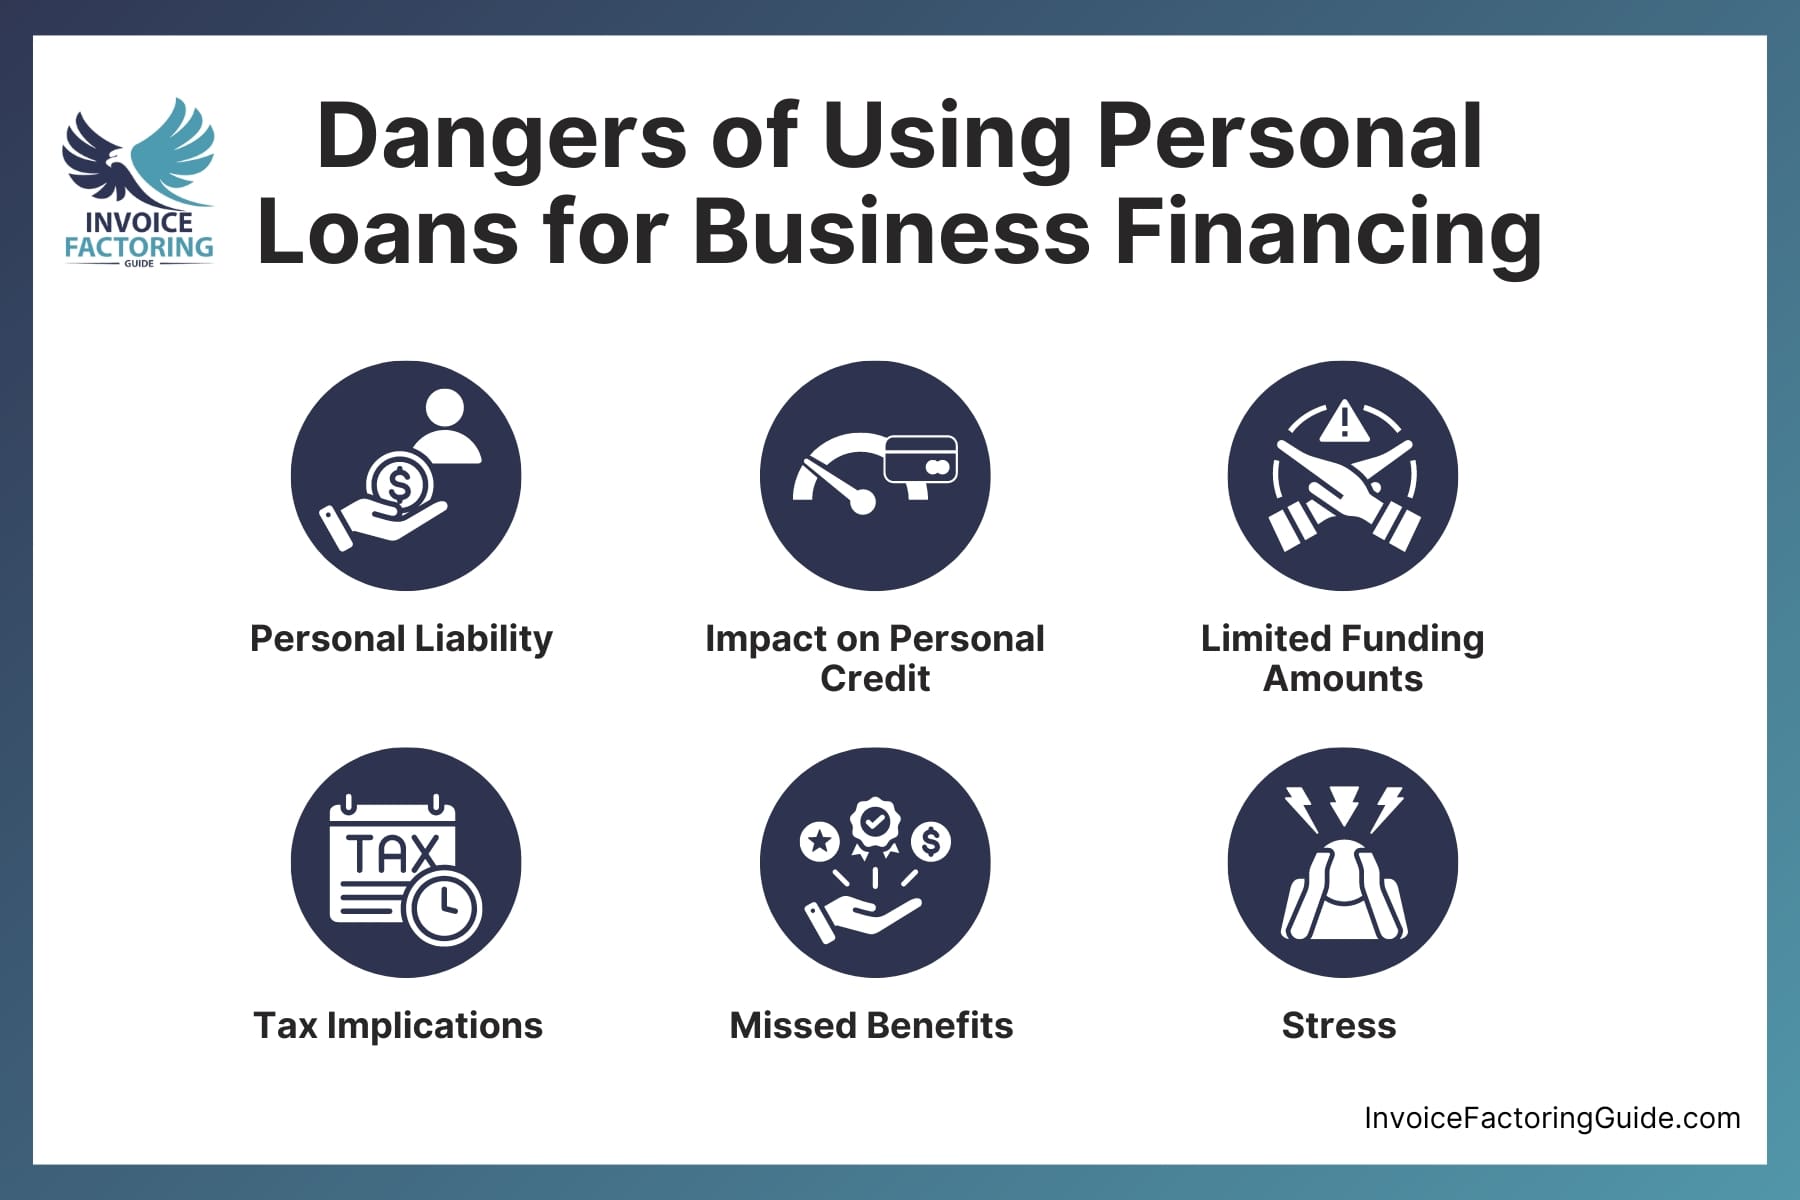 Using Personal Loans for Business Financing Can Be Dangerous